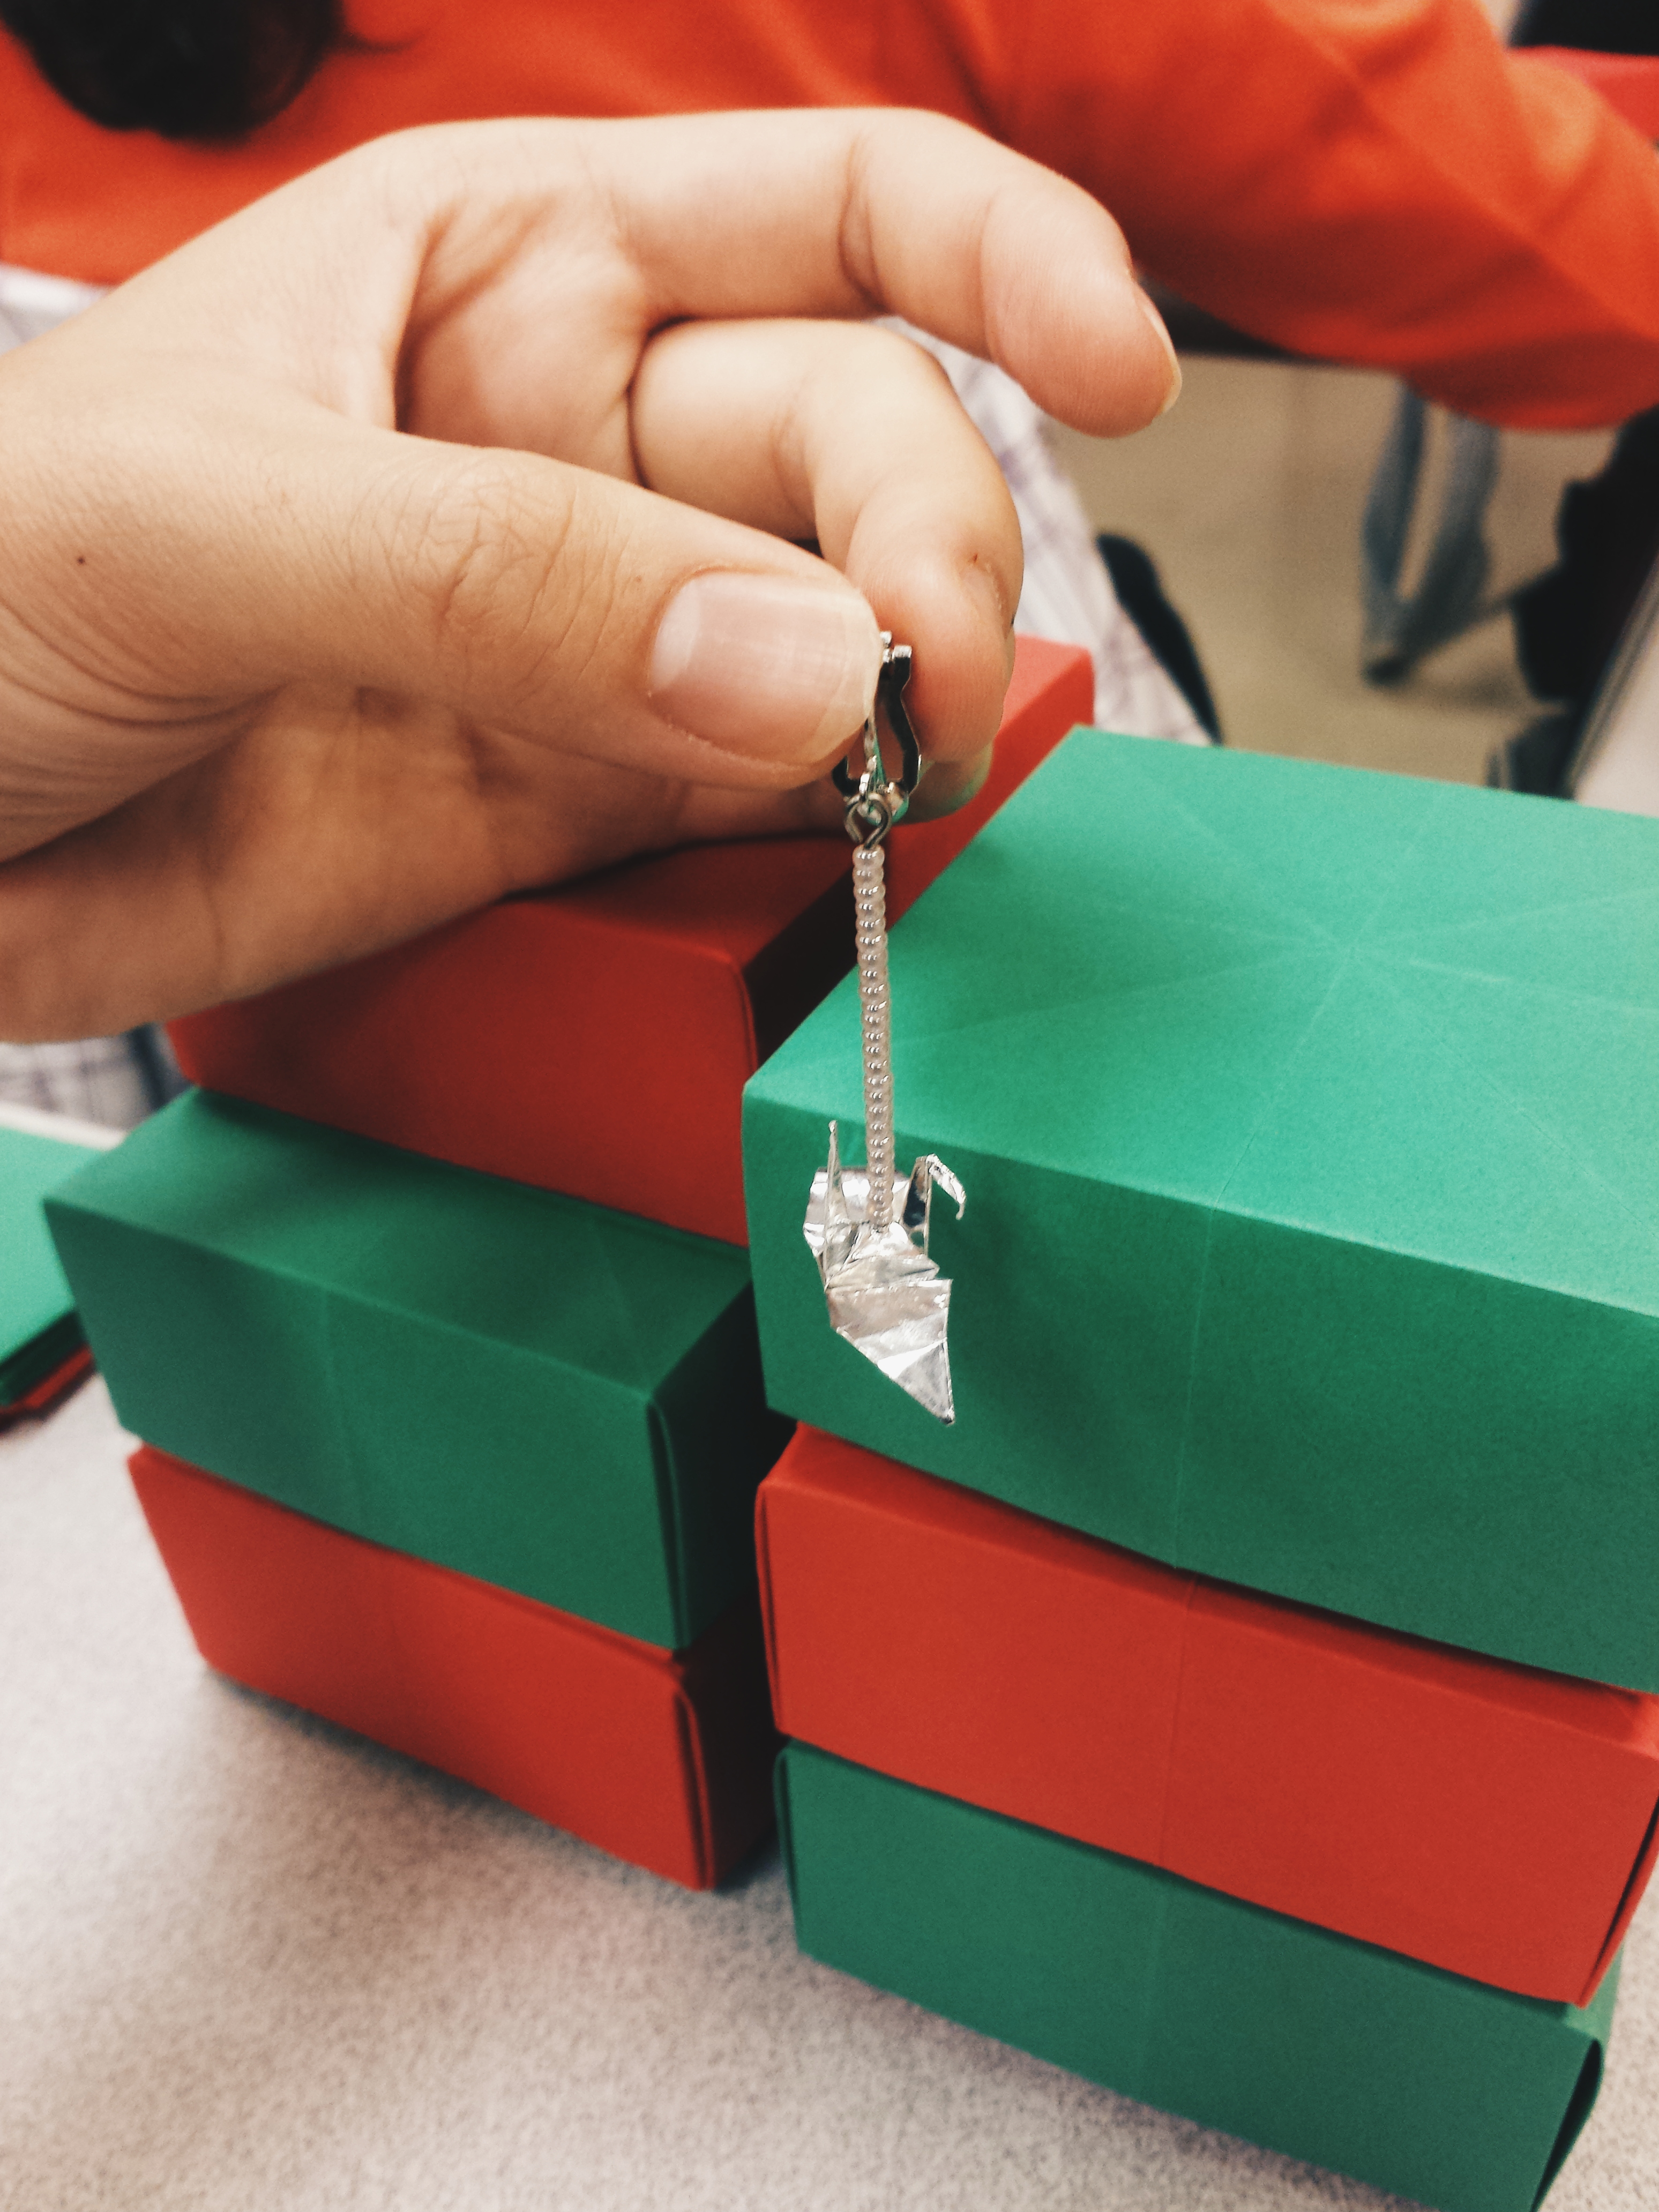 My hand holding an earring made from a small silver crane attached to a long chain earring. Red and green folded Christmas gift boxes are in the background.